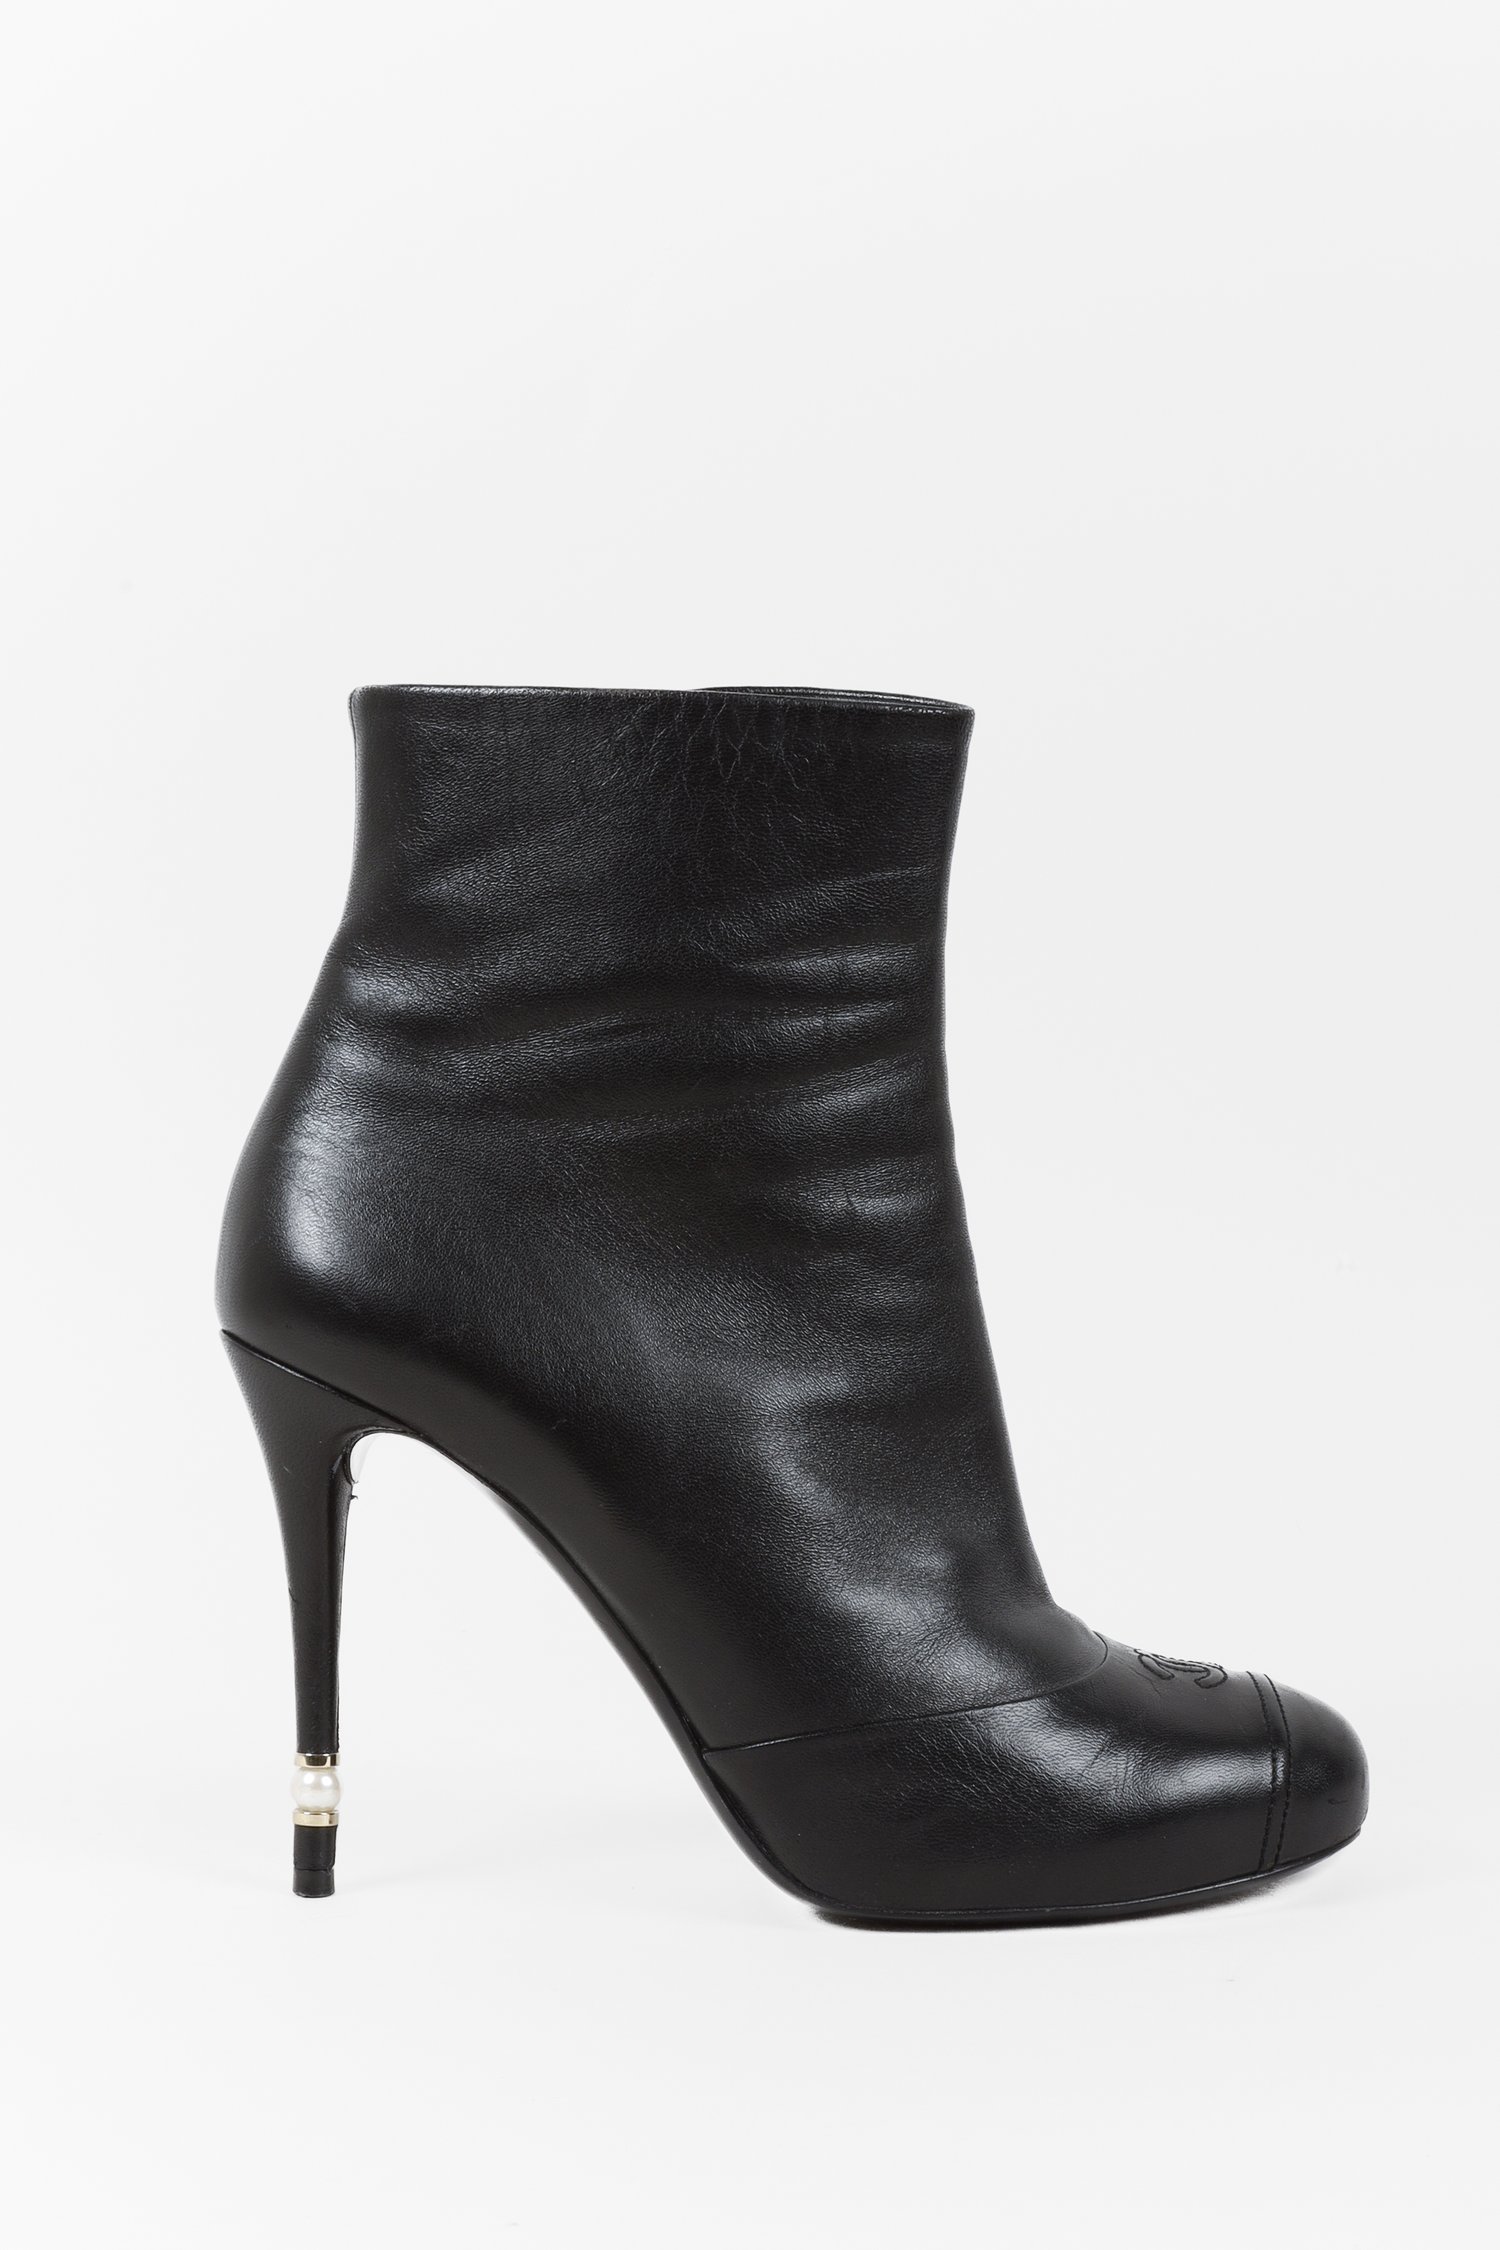 Chanel CC Black Leather Pearl Heel Booties — BLOGGER ARMOIRE